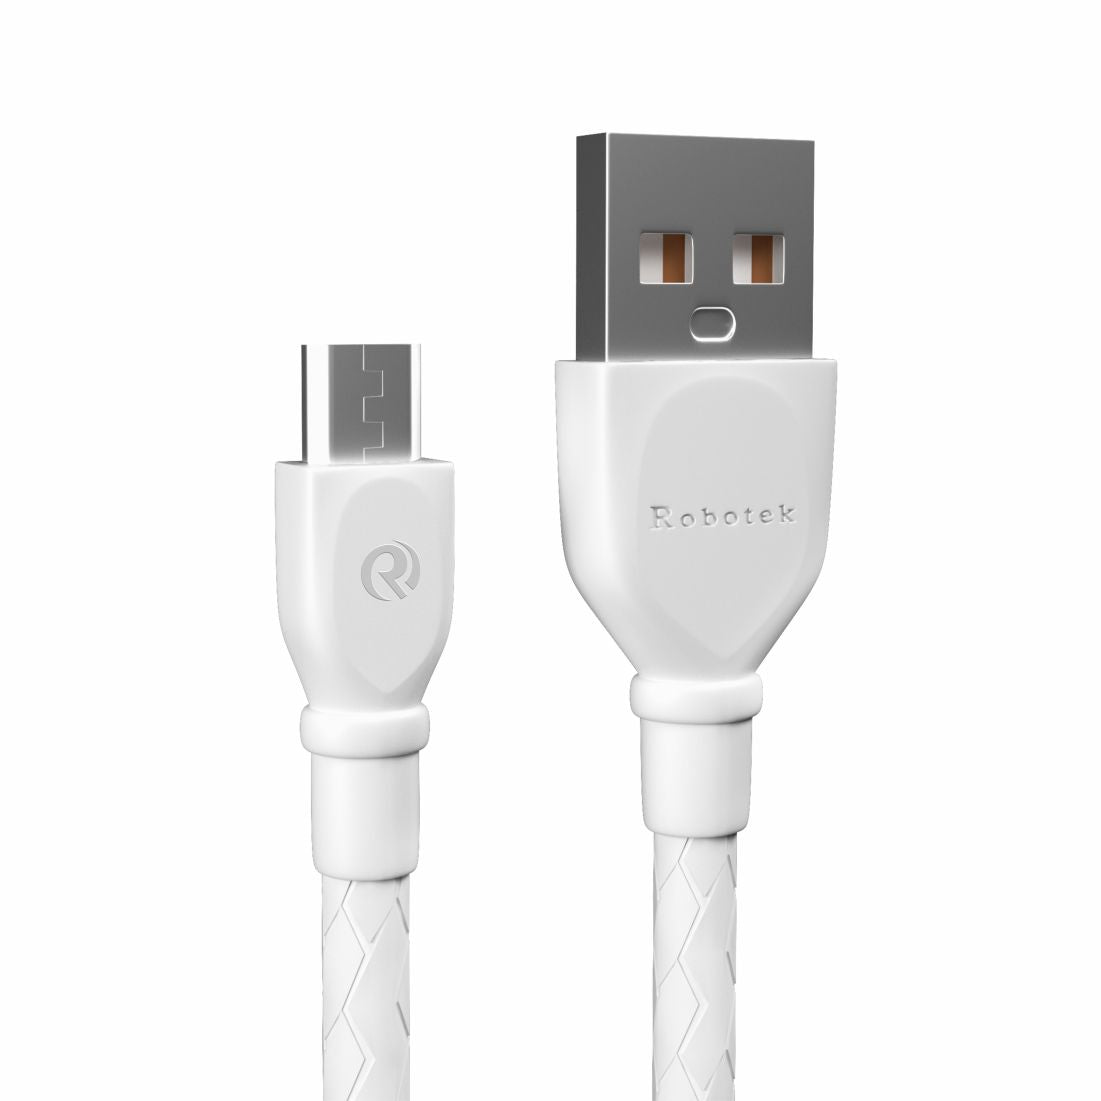 DC-108 Raftaar Series Micro USB 3A Fast Charging Cable, Made in India, 480Mbps Data Sync, Solid Cable, 1 Meter Long USB Cable for Micro USB Devices (White)